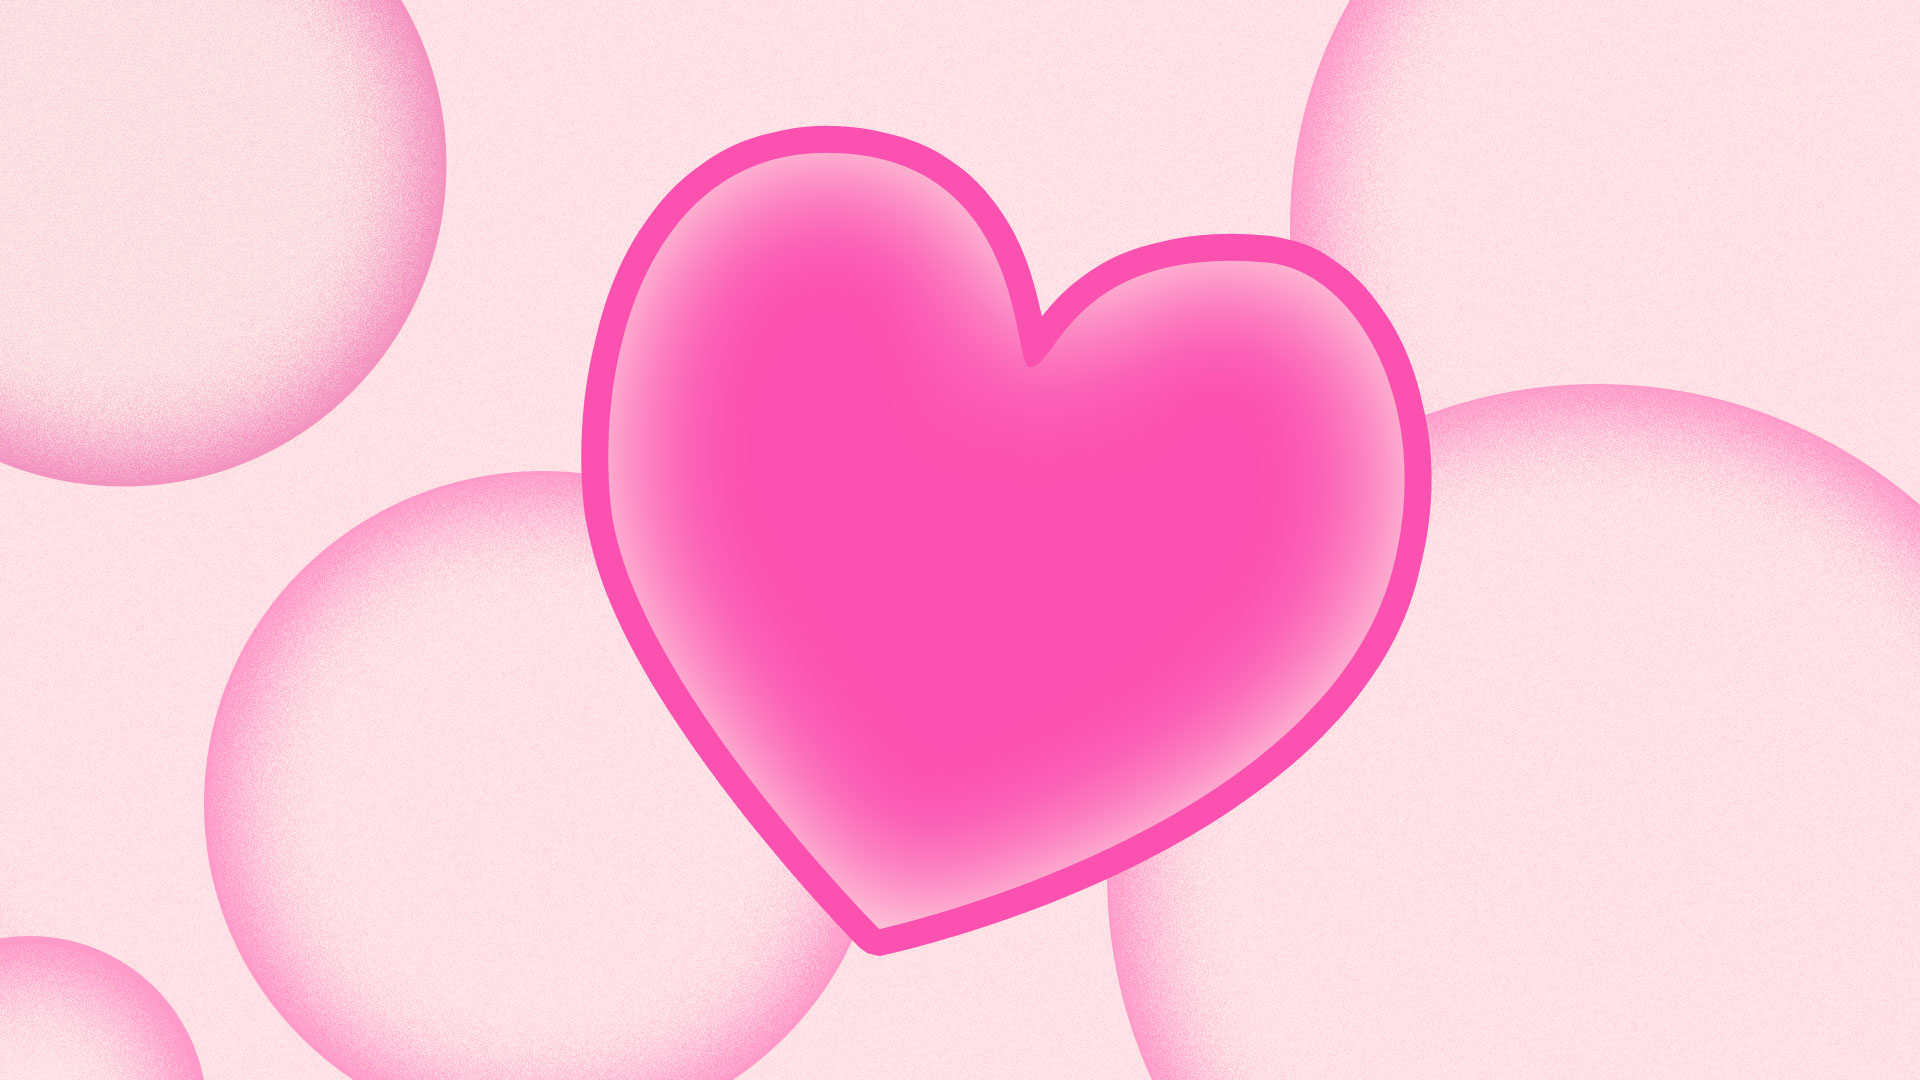 Here Is A Big Pink Heart For Your Desktop This The Small Image